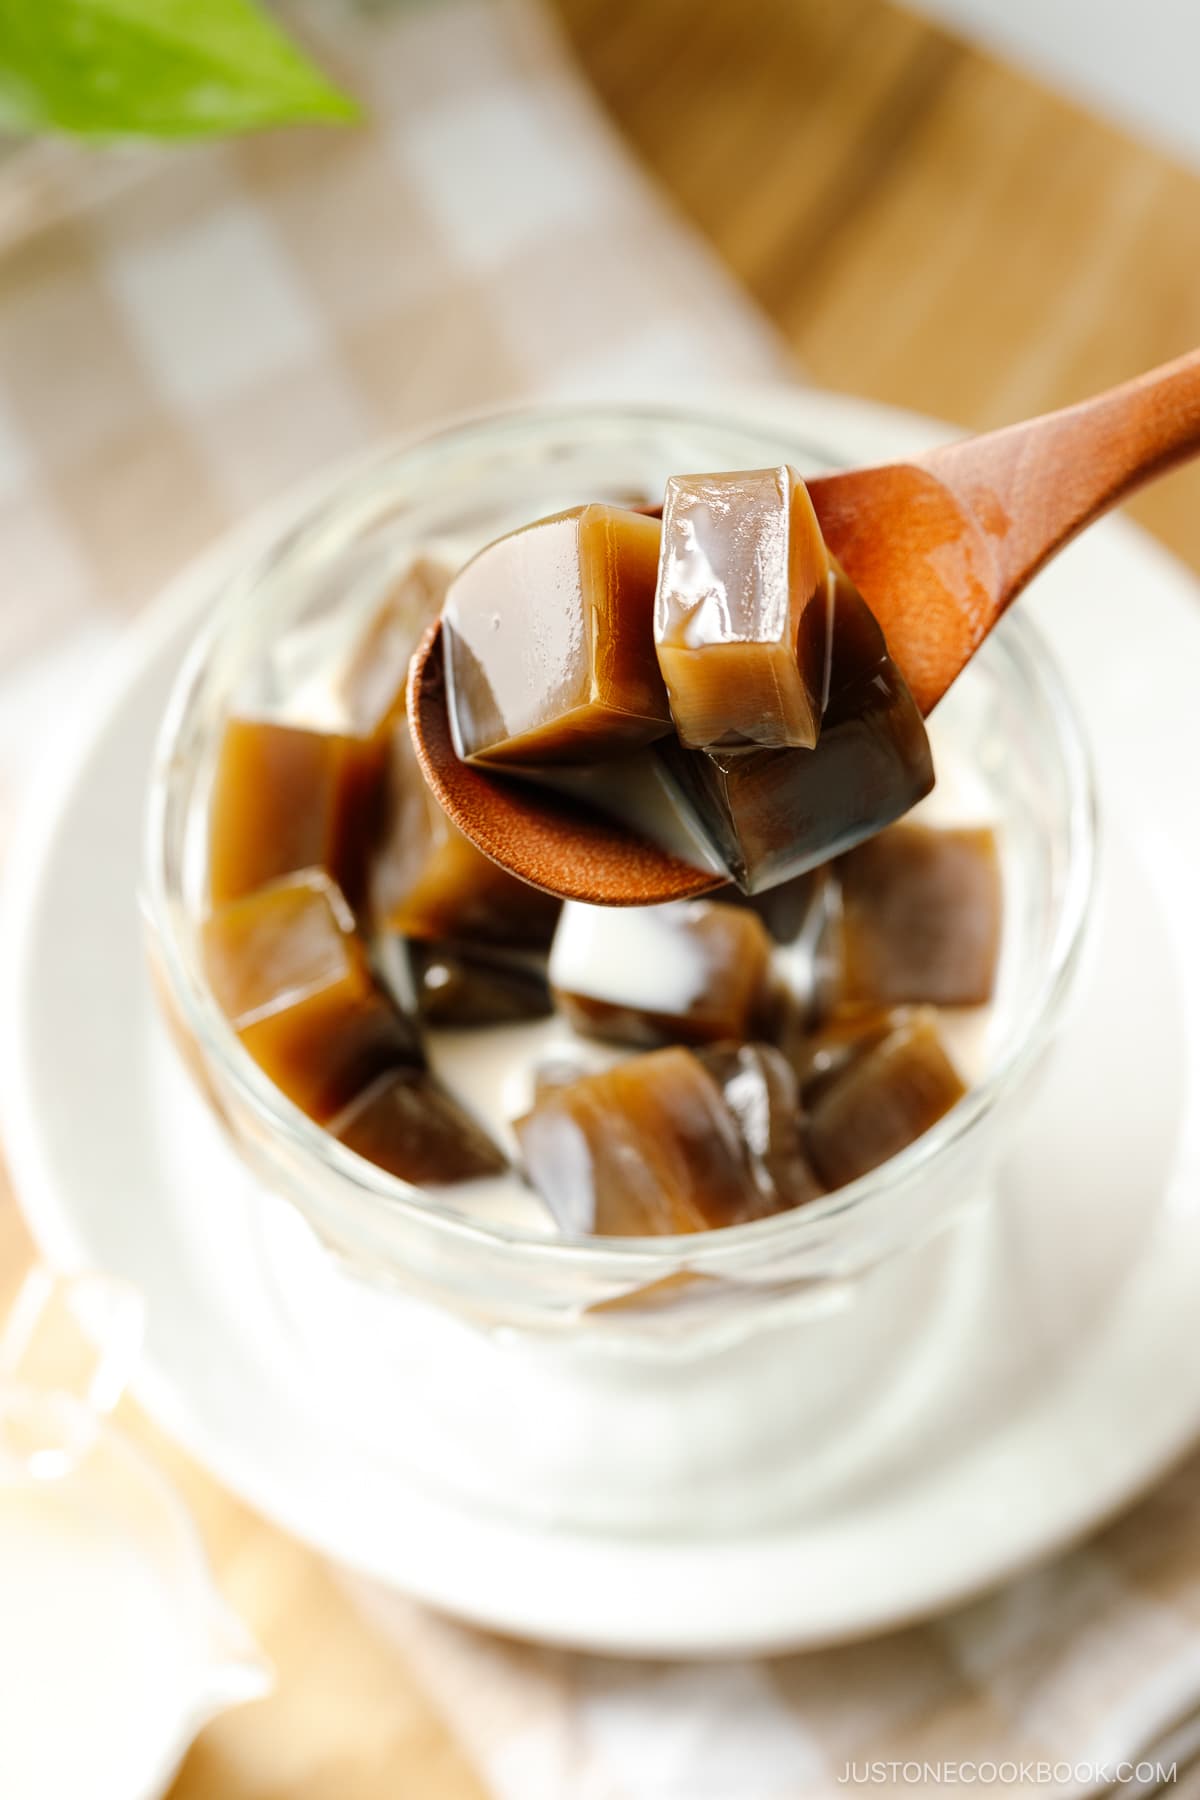 A glass bowl containing cubed Hojicha Jelly drizzled with sweetened condensed milk.